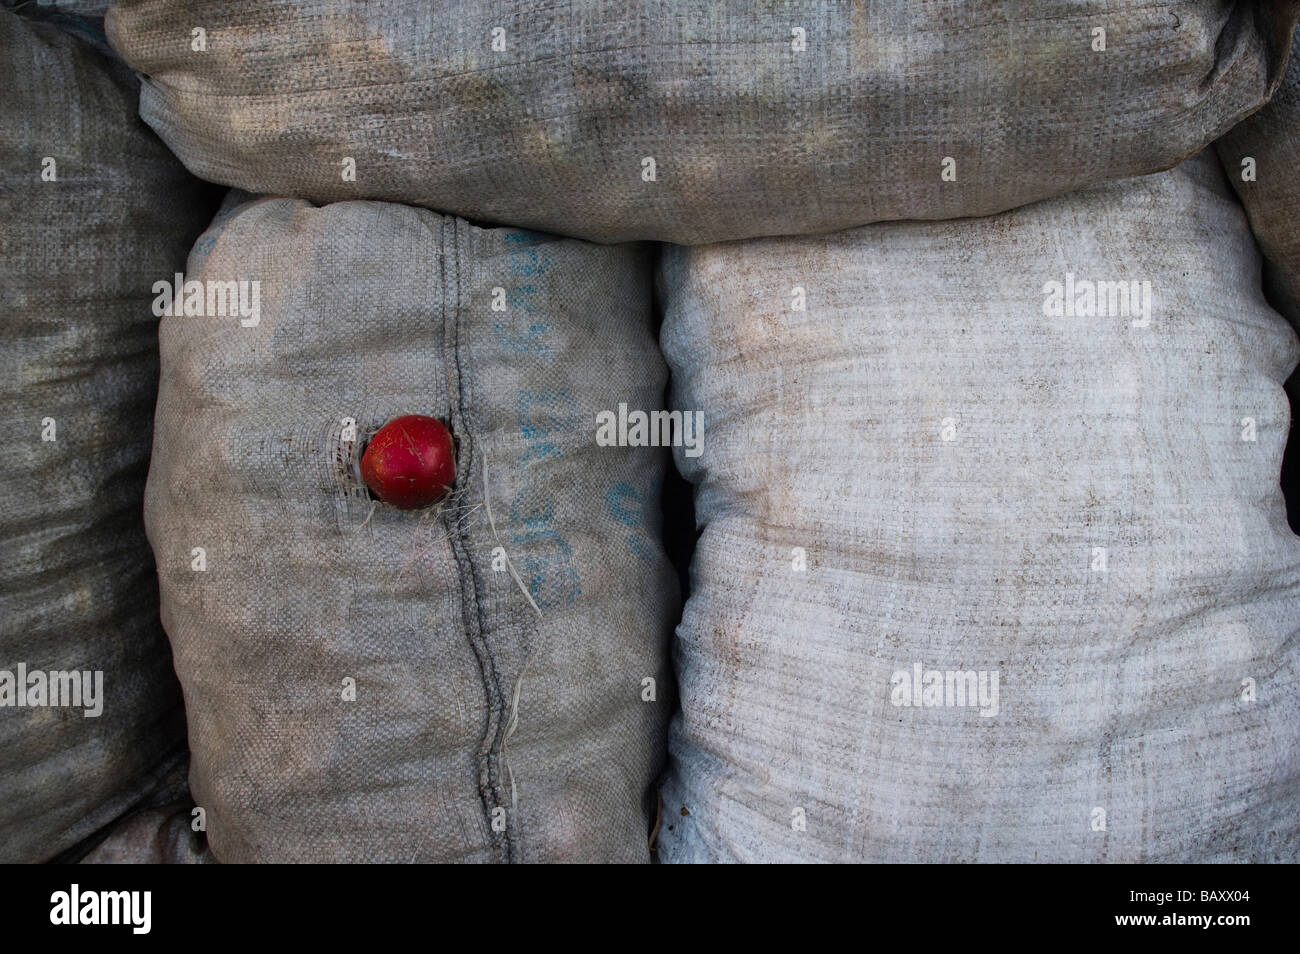 Sacks of hand collected cider apples awaiting pressing Wilkins Cider Orchard Somerset England Stock Photo